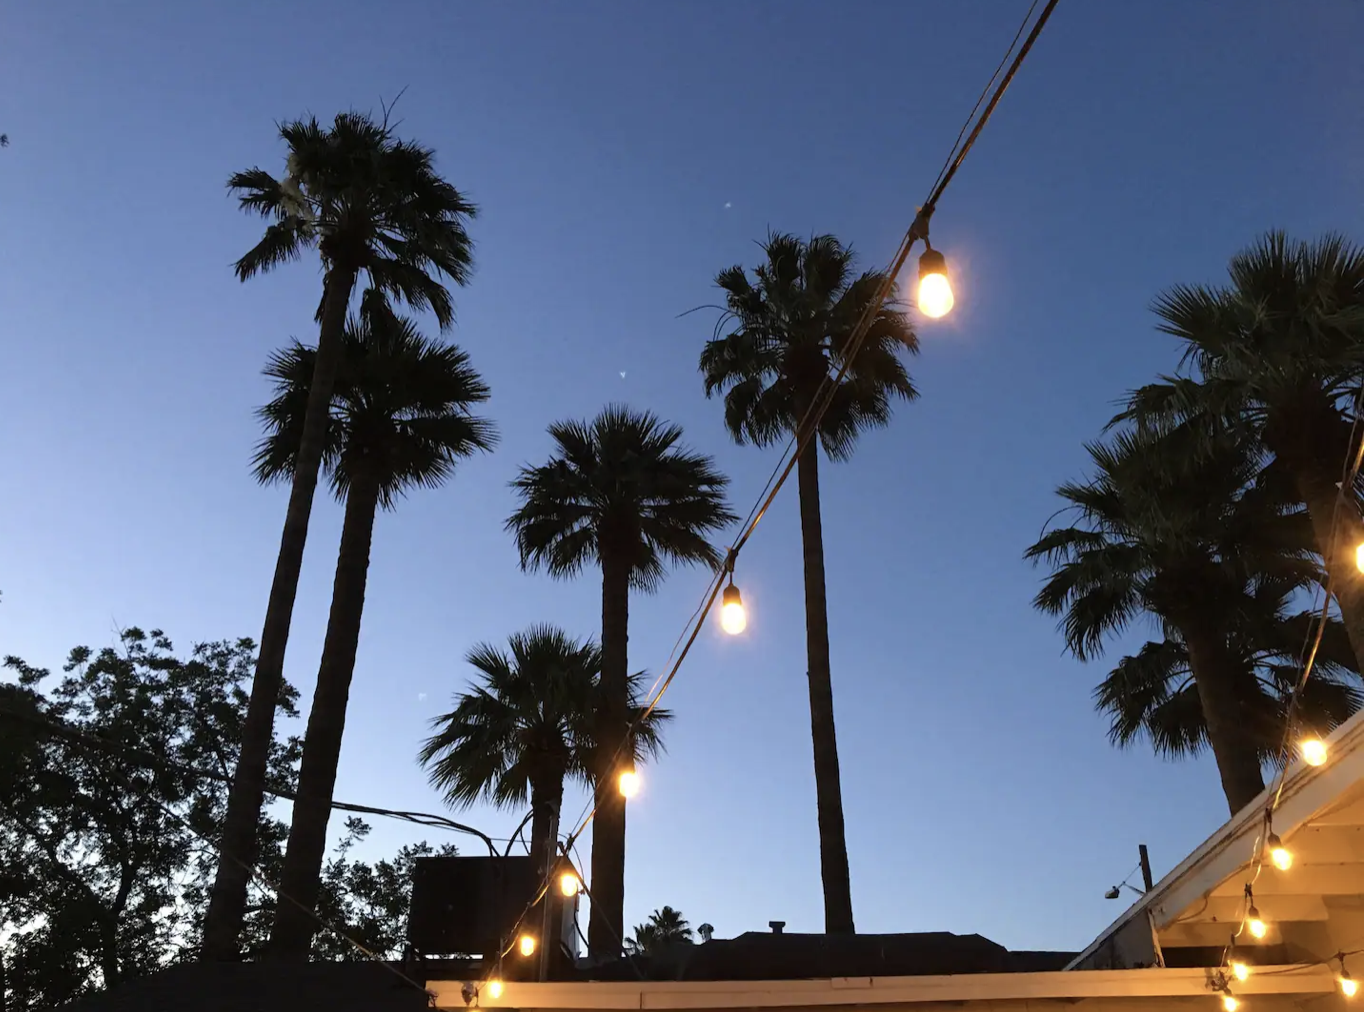 Look for the 8 palm trees in front of the house, and you'll know you're at the right place!